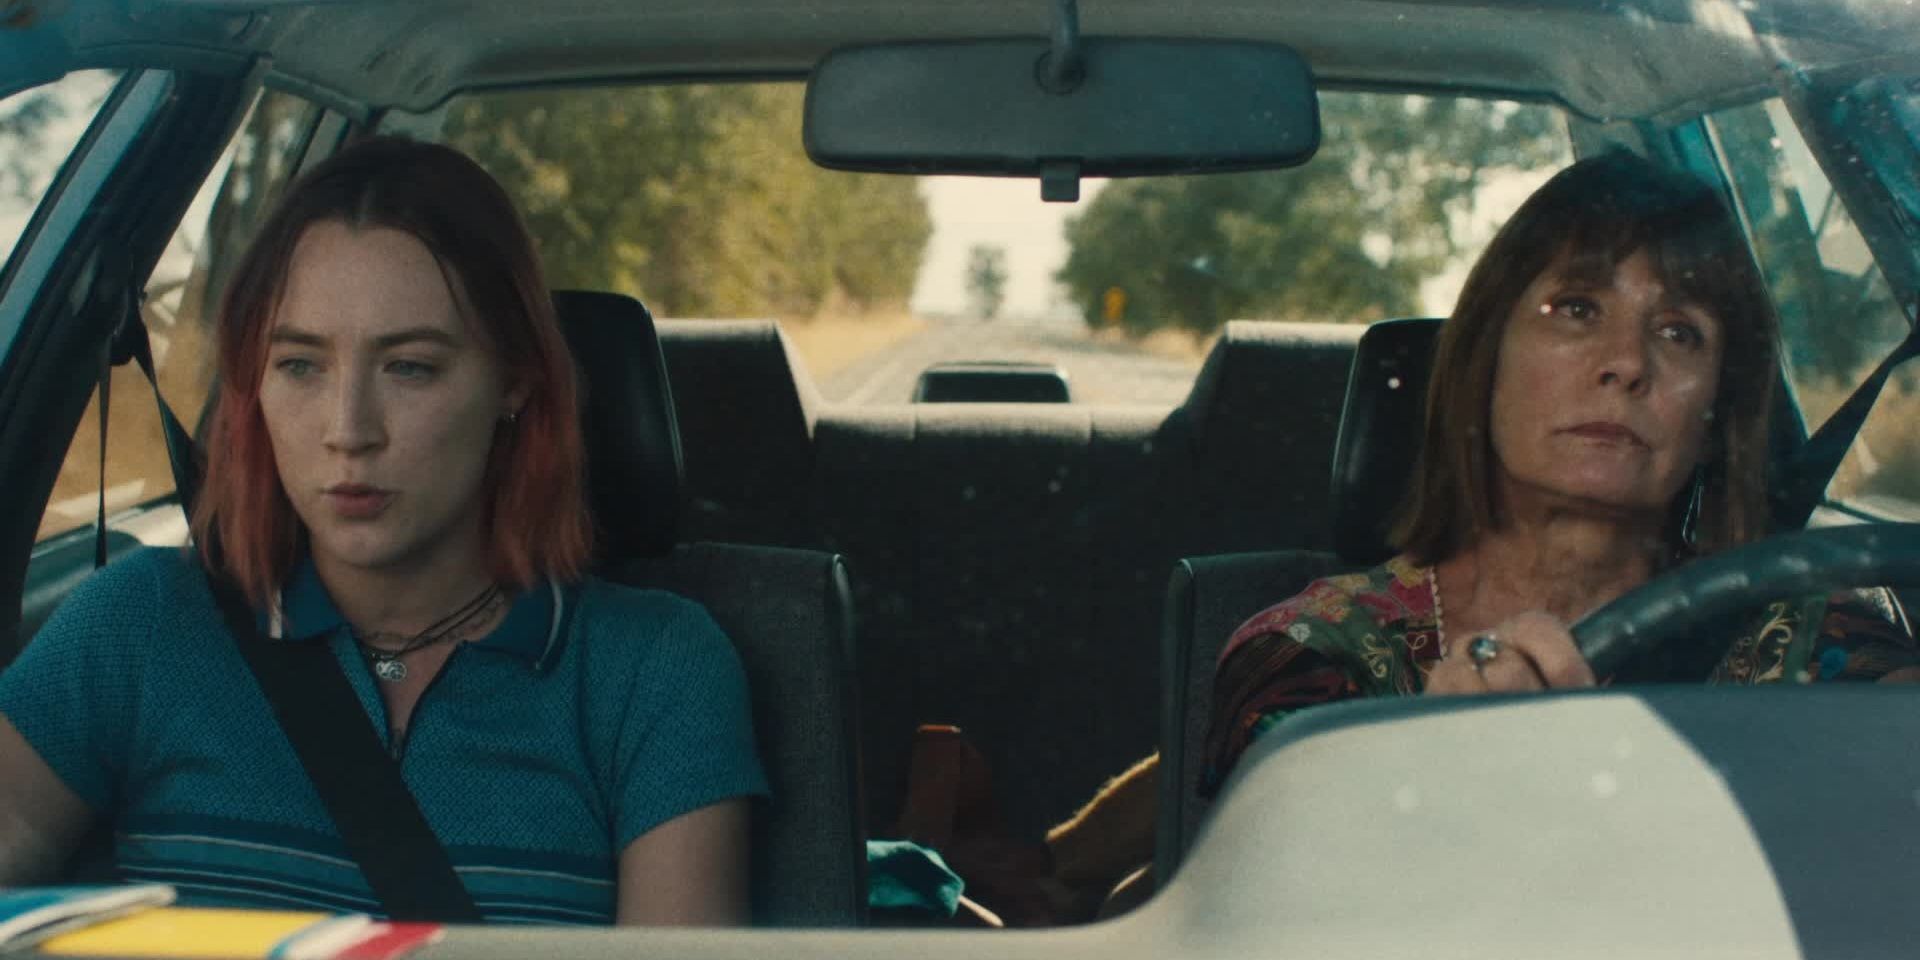 Christine and Marion in the car in Lady Bird